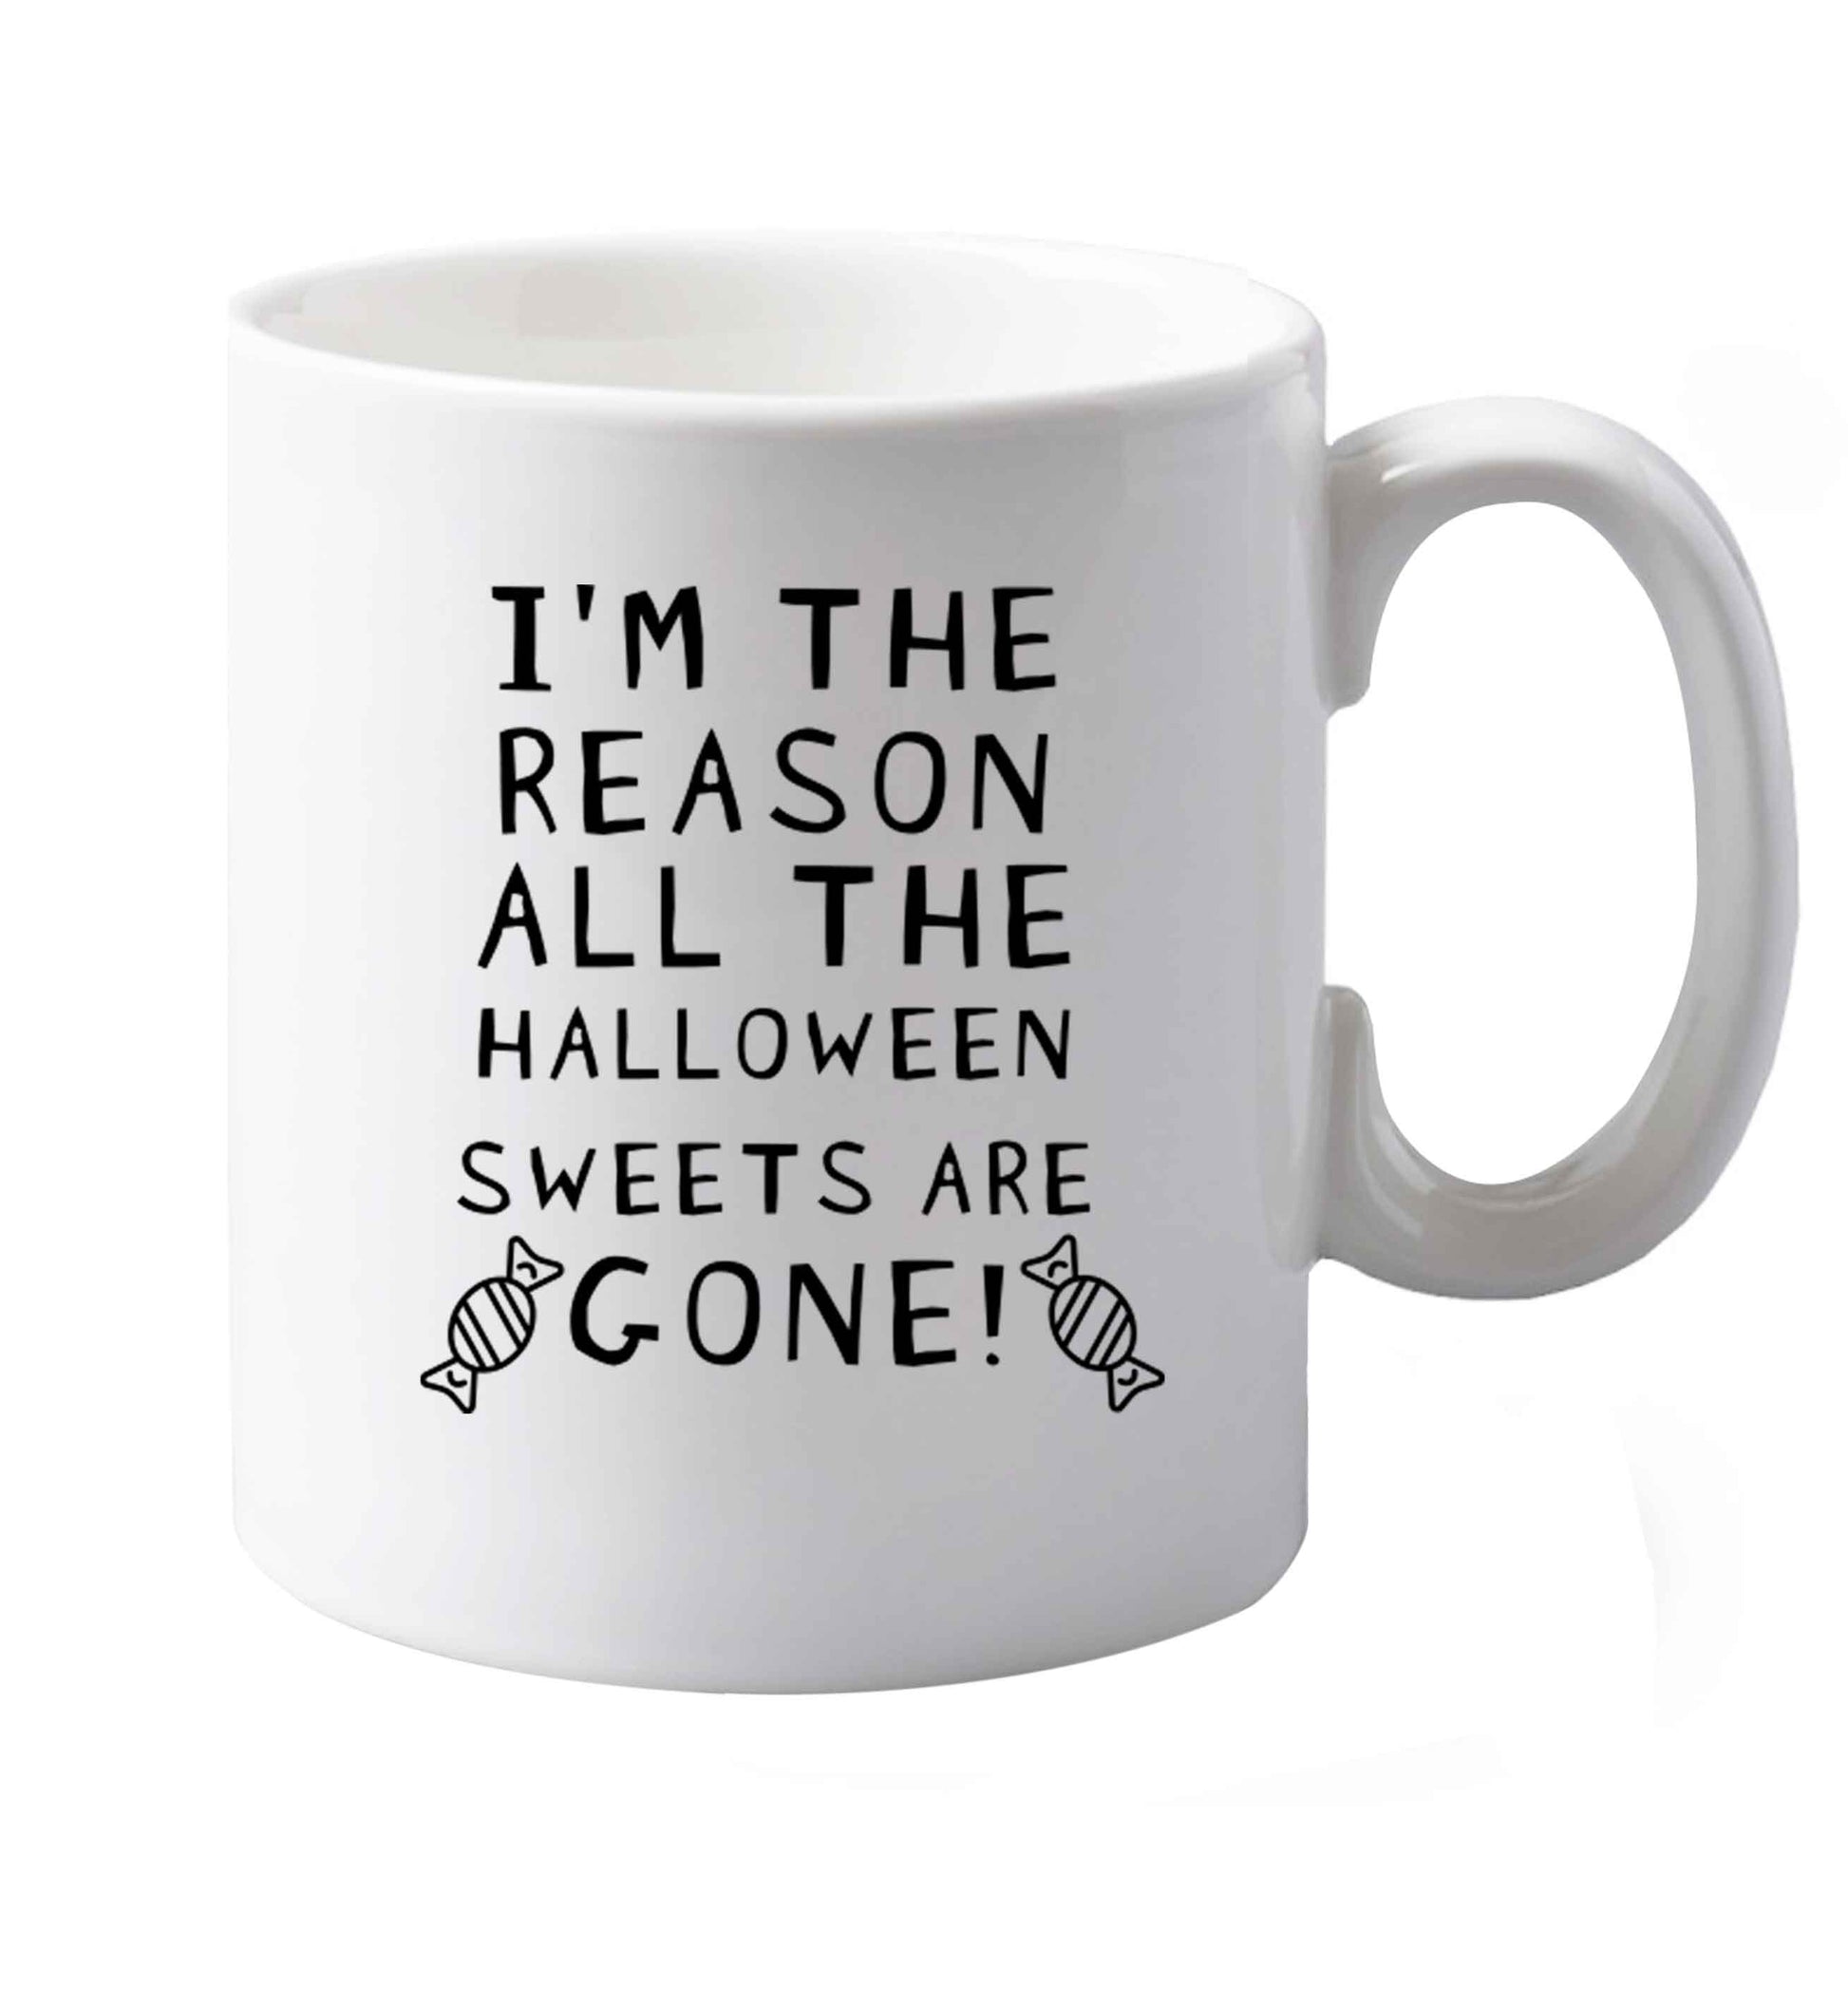 10 oz I'm the reason all of the halloween sweets are gone ceramic mug both sides